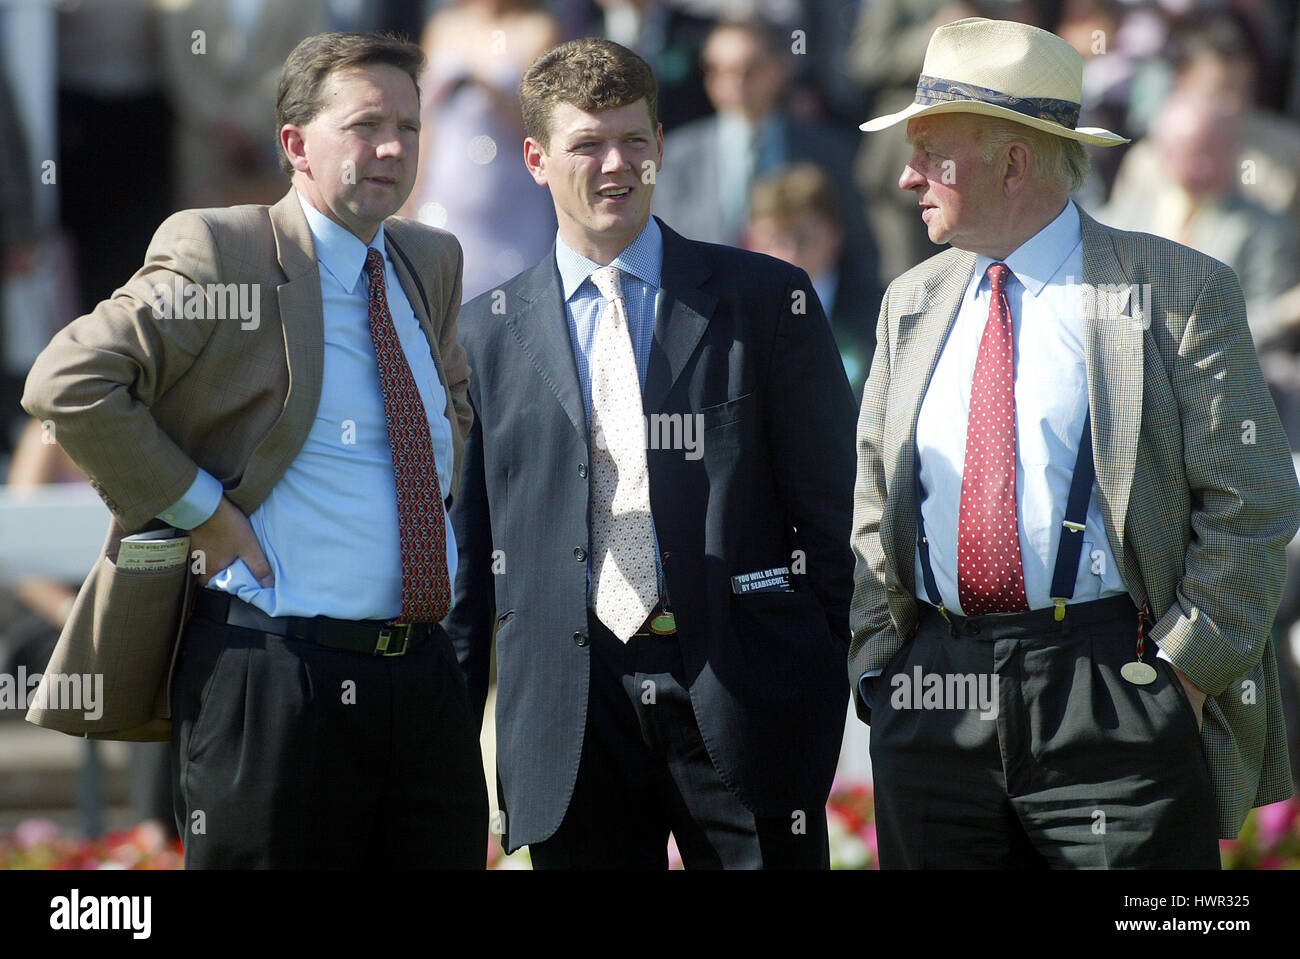 A.STEWART TIM & PETER EASTERBY RACE HORSE TRAINERS DONCASTER RACECOURSE DONCASTER 11 September 2003 Stock Photo